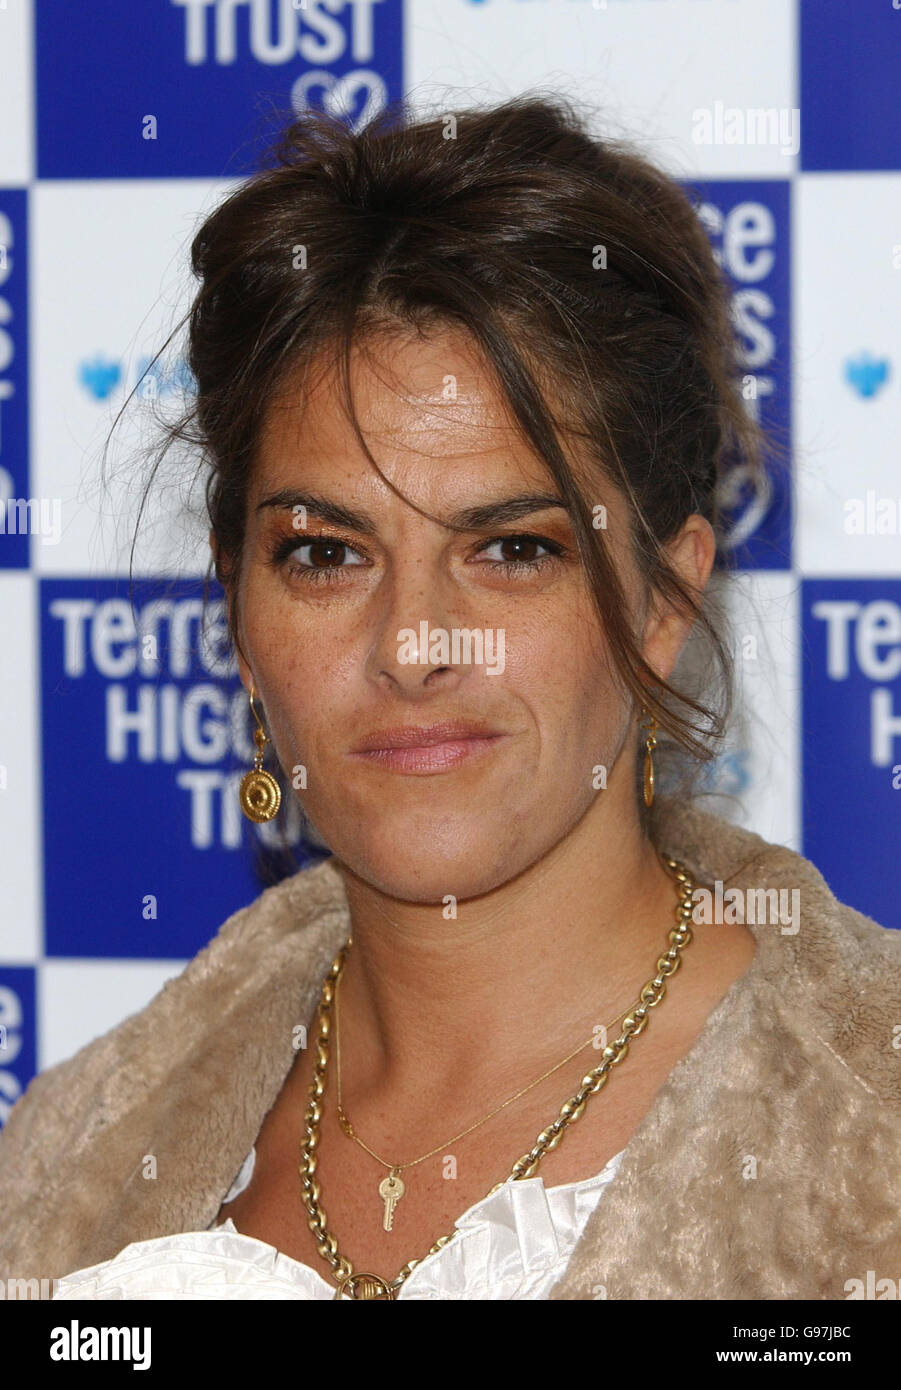 Tracey Emin (who contributed an artwork for auction) during the 10th annual Lighthouse Gala Auction to raise funds for the Terrence Higgins Trust, at Christie's in central London, Wednesday 15 March 2006. PRESS ASSOCIATION Photo. Photo credit should read: Anthony Harvey/PA Stock Photo